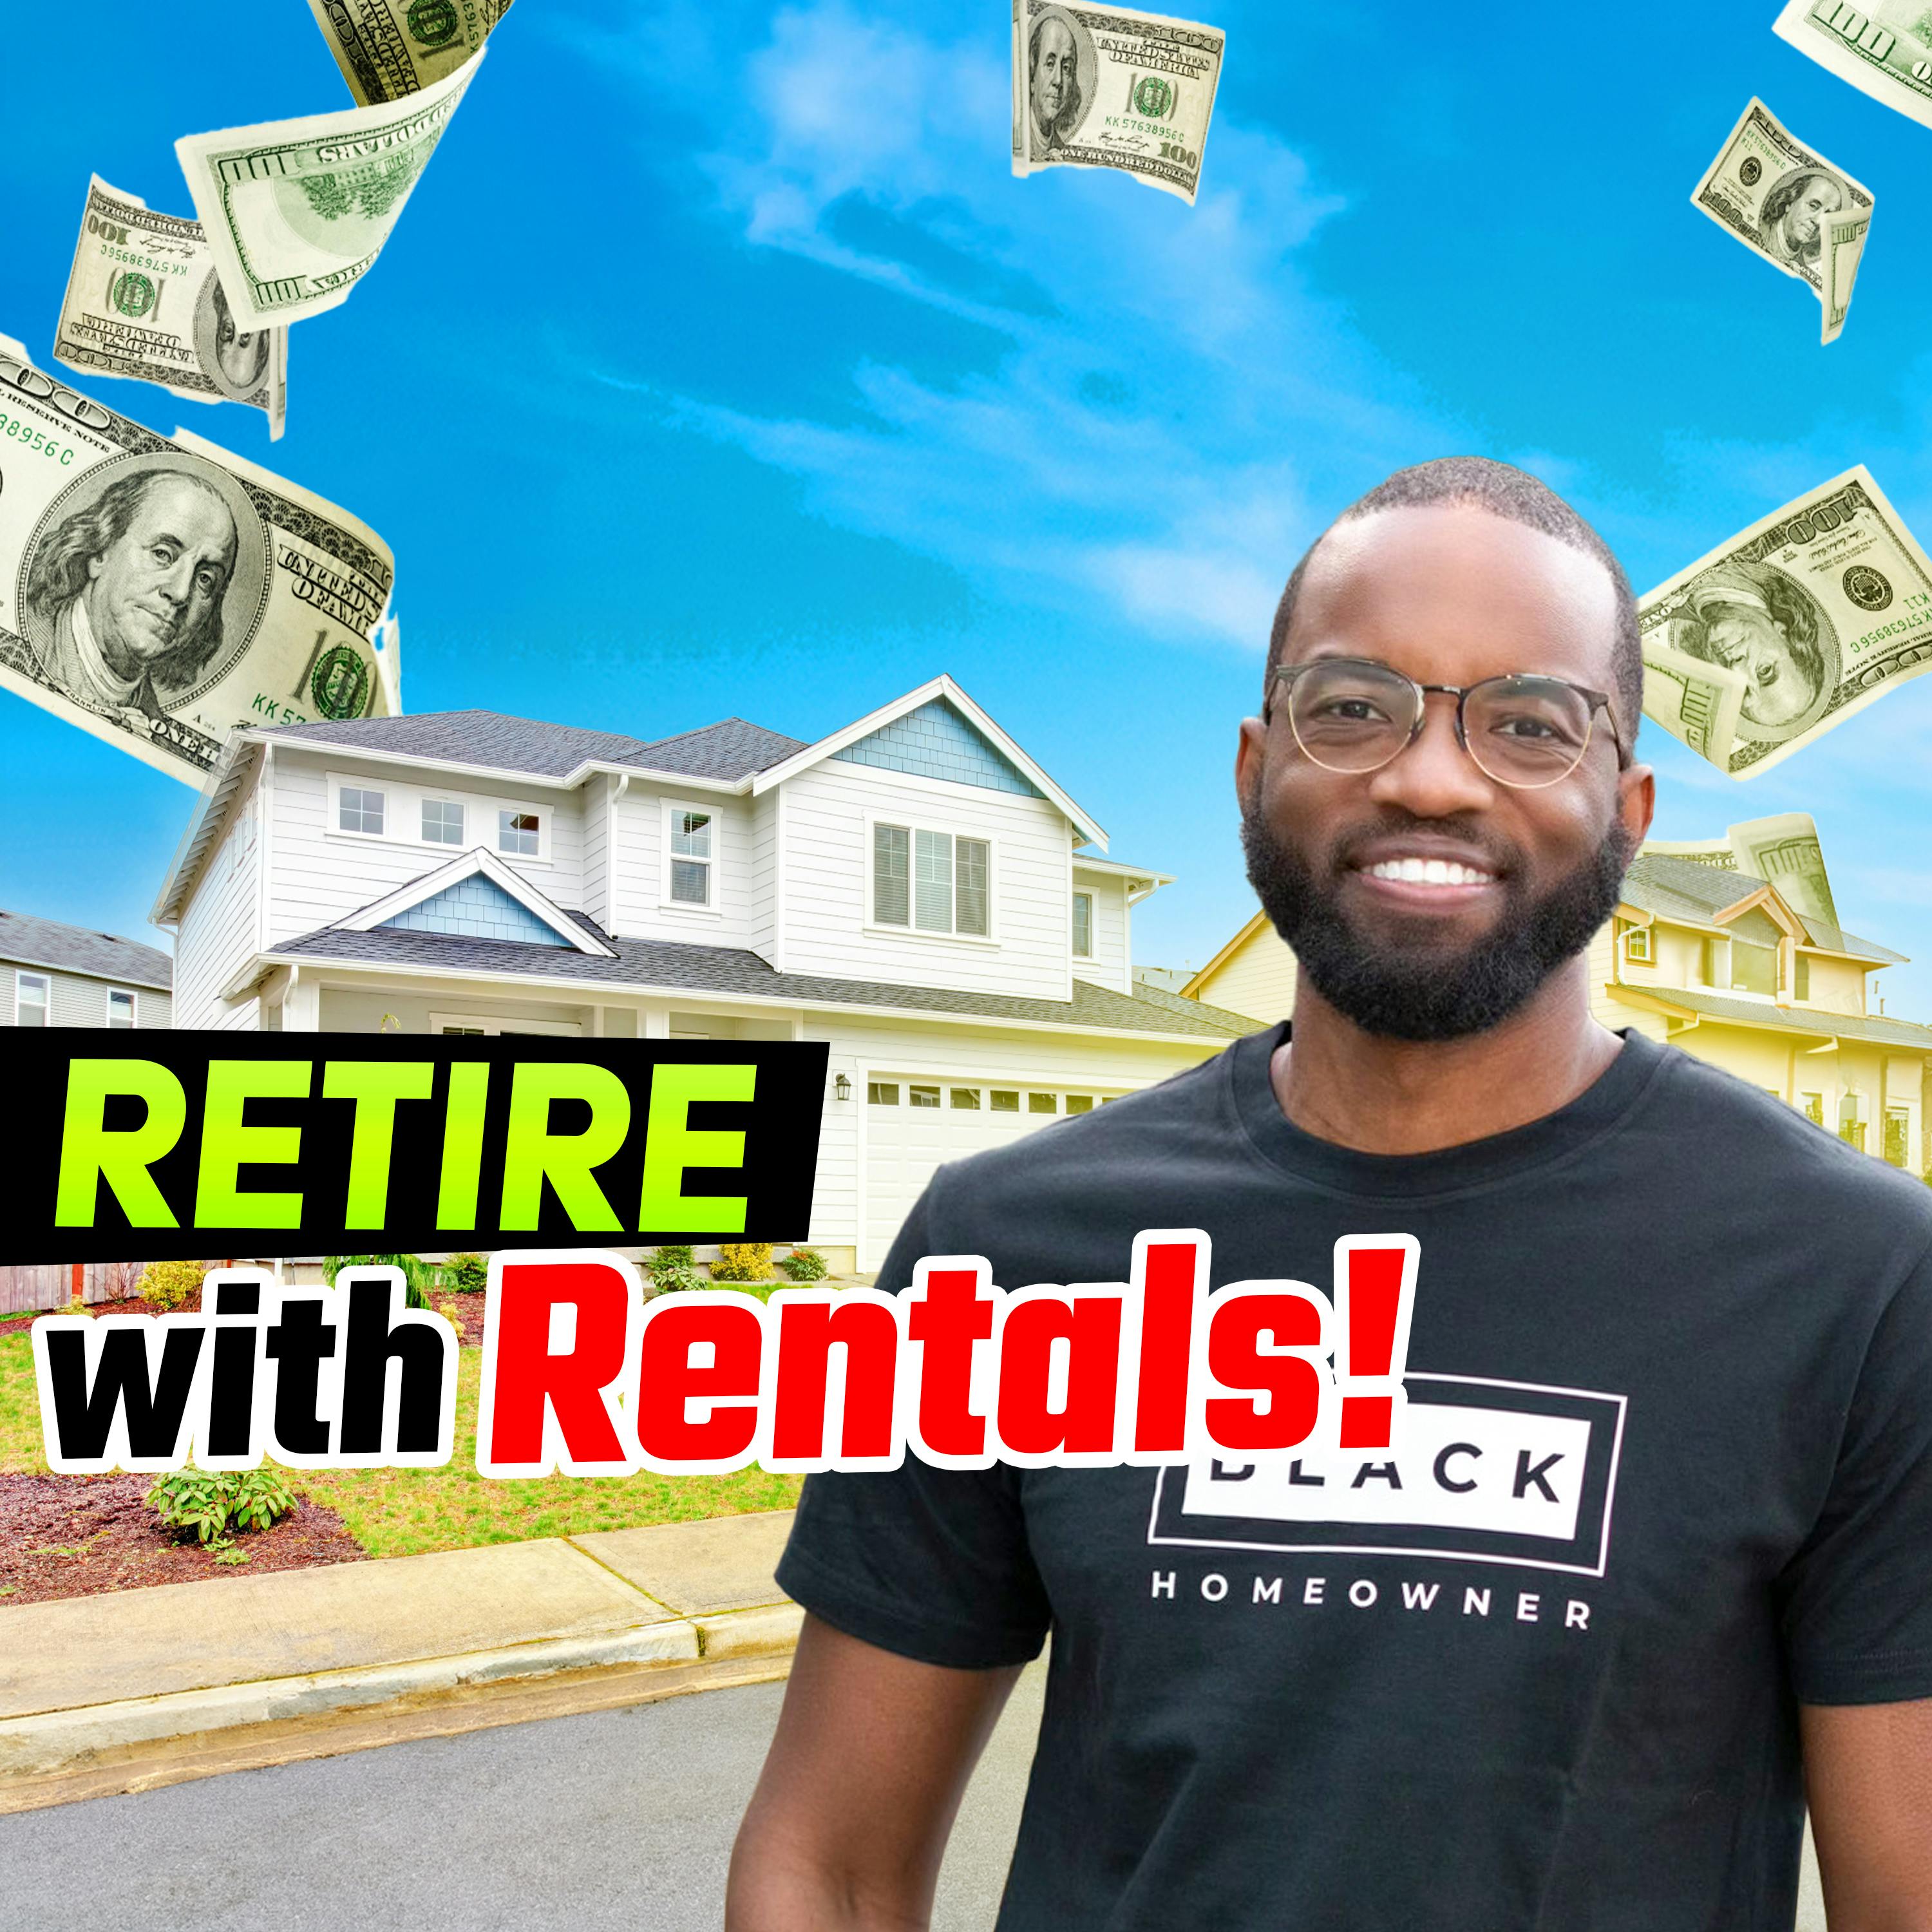 325: How to Retire with “Turnkey” Rental Properties (as a COMPLETE Beginner) w/Sam Dolciné